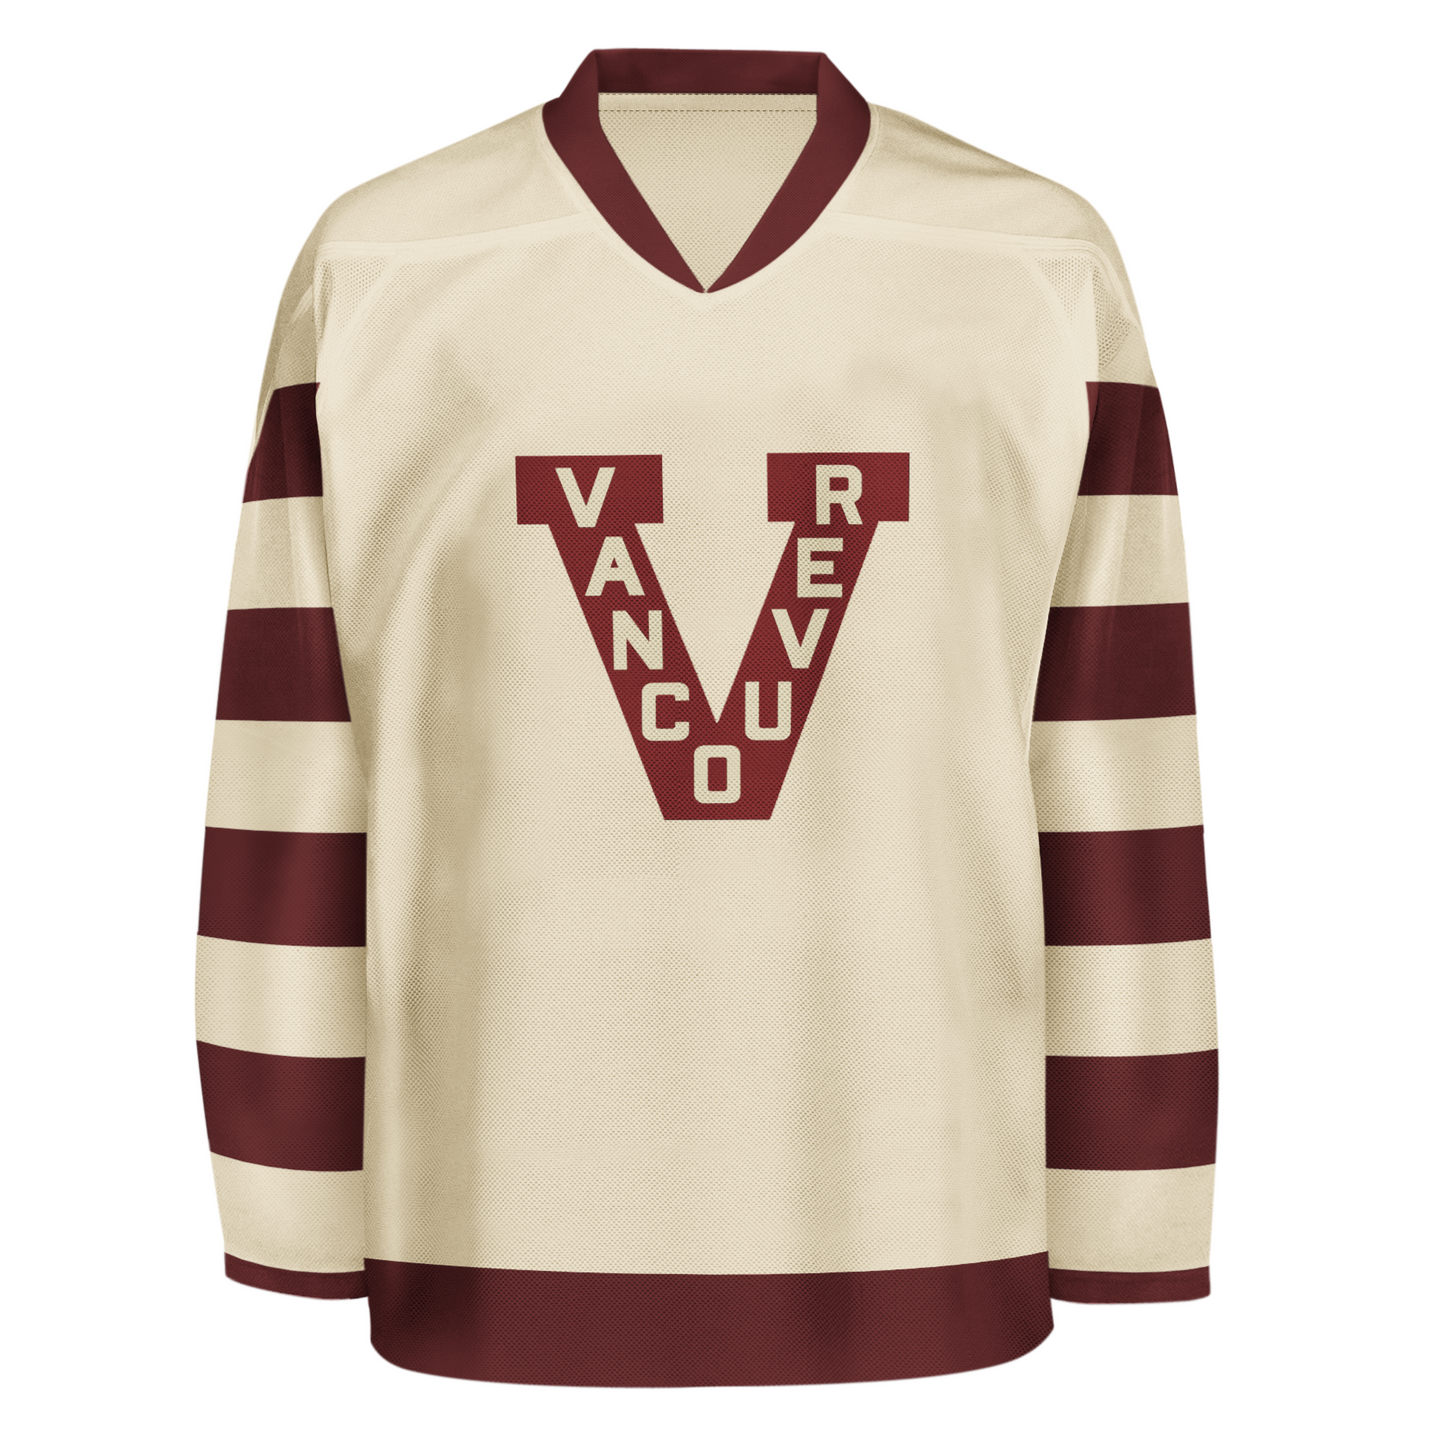 New Maroon Vancouver Millionaires Shirt